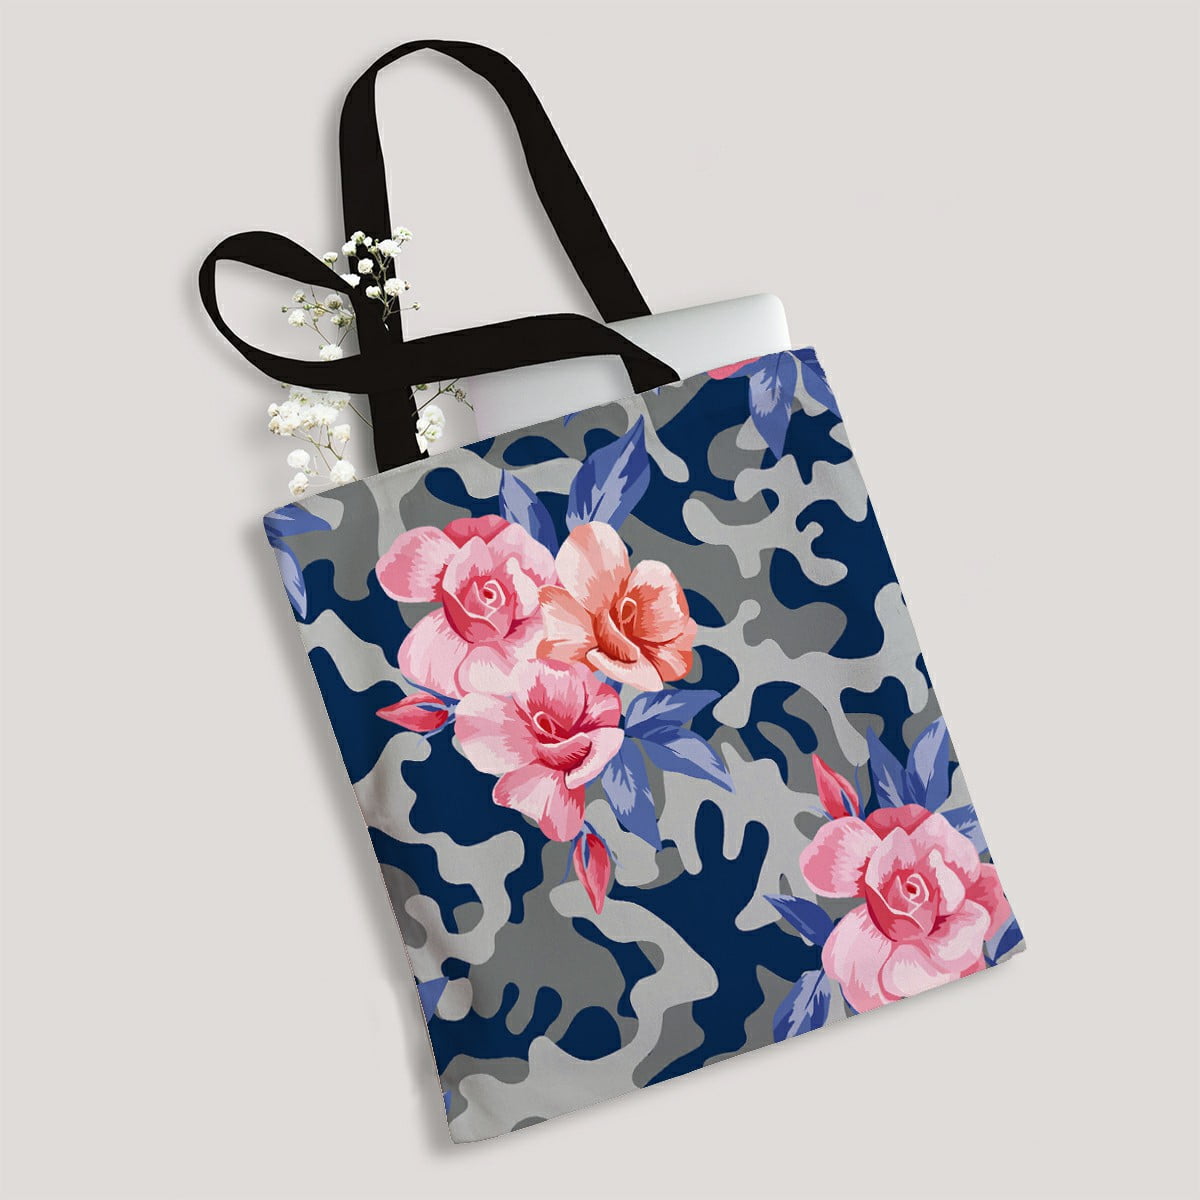 Scarfand's Foldable and Reusable Roses Shopping Bag 